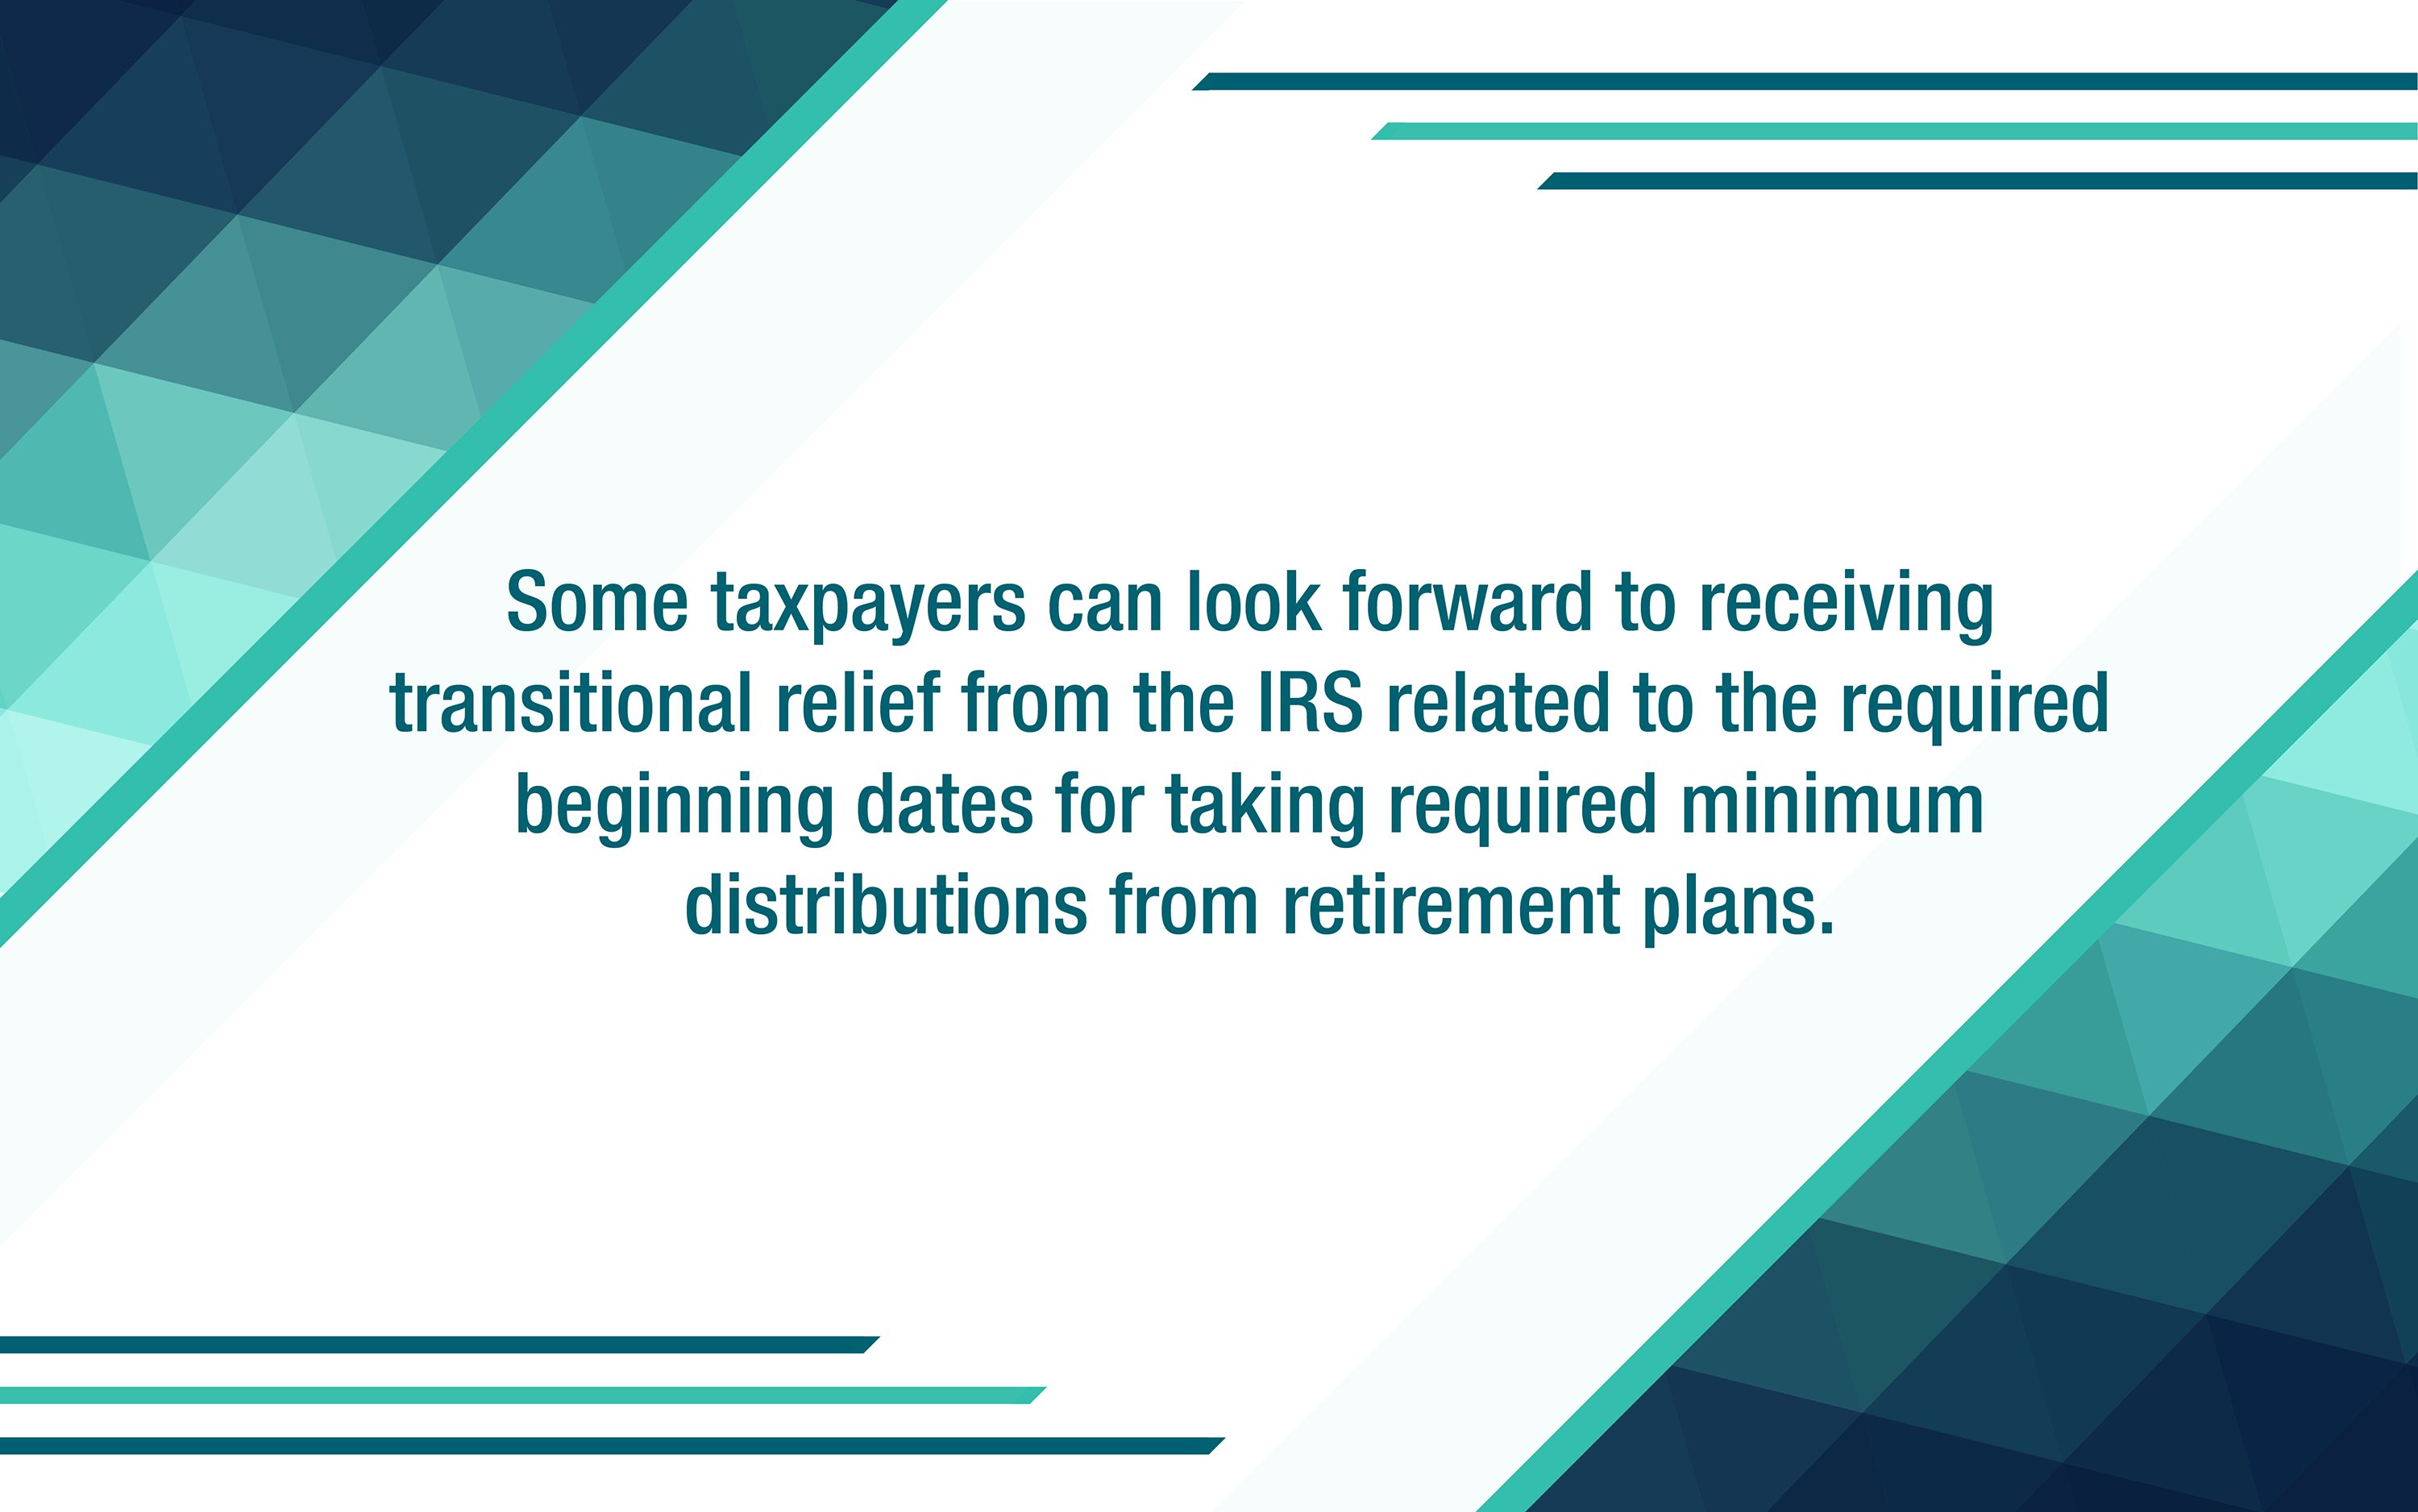 IRS provides transitional relief for RMDs and inherited IRAs